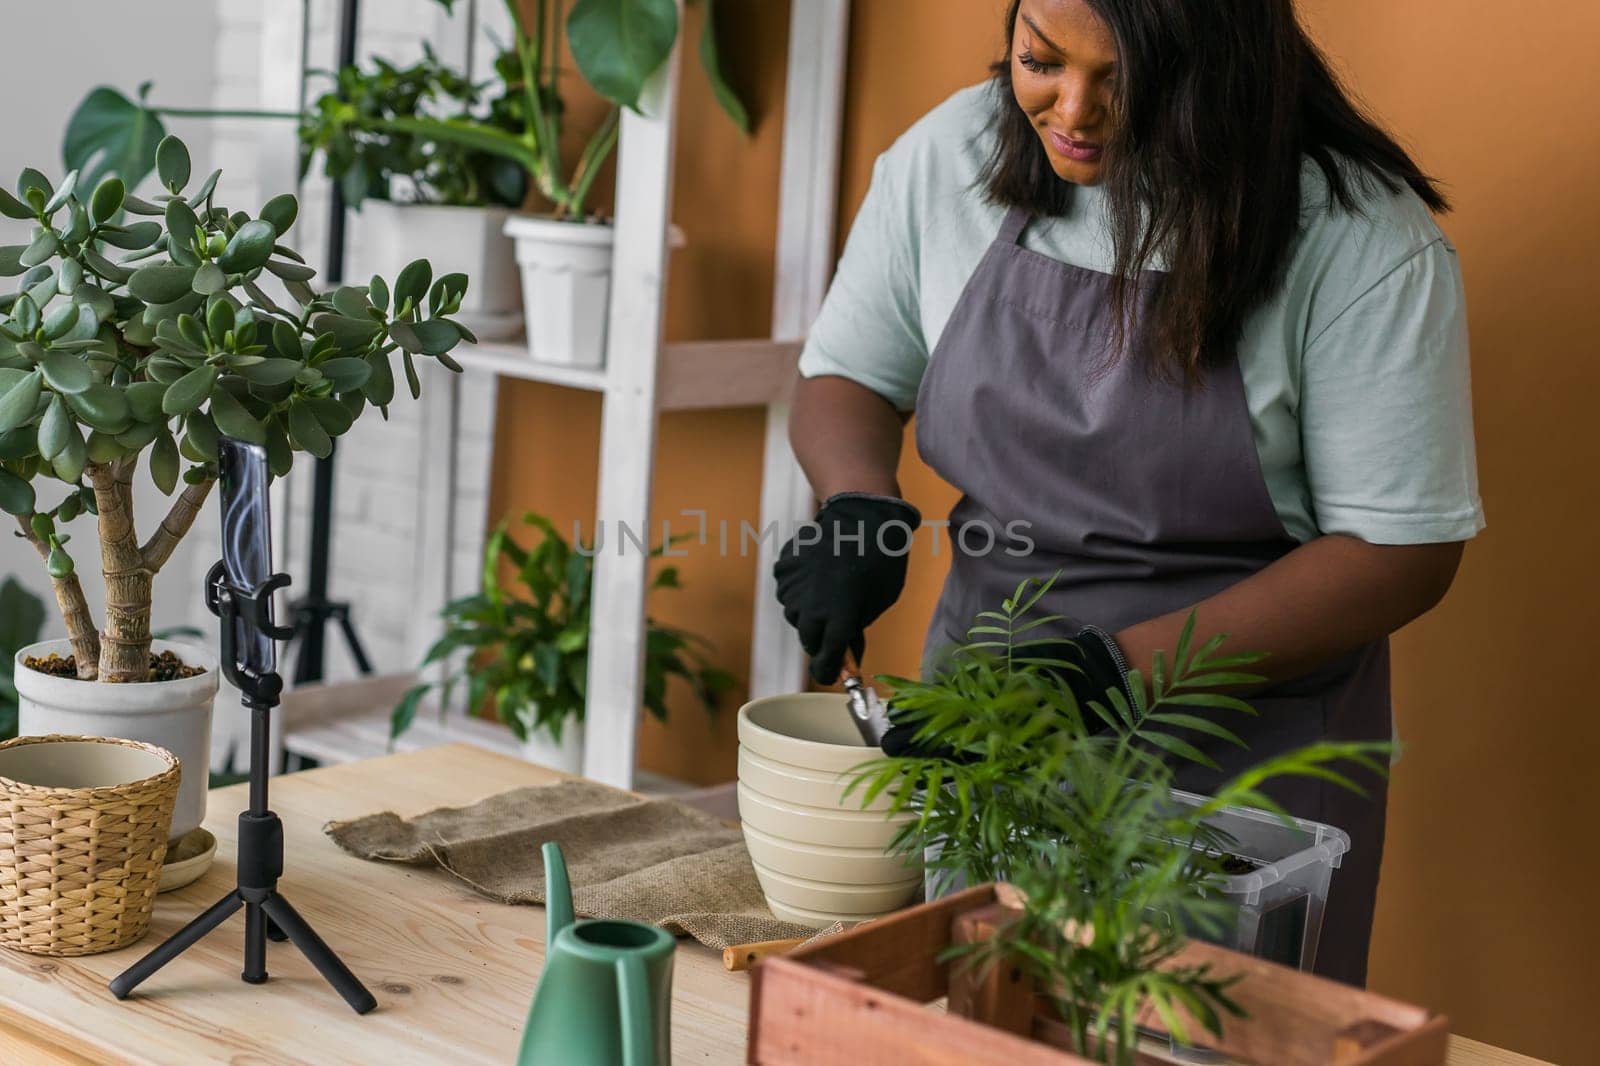 African american girl blogger influencer work on home video camera selfie shoot filming take care home plants and transplanting plant in flowerpot. Home gardening and florist concept. by Satura86